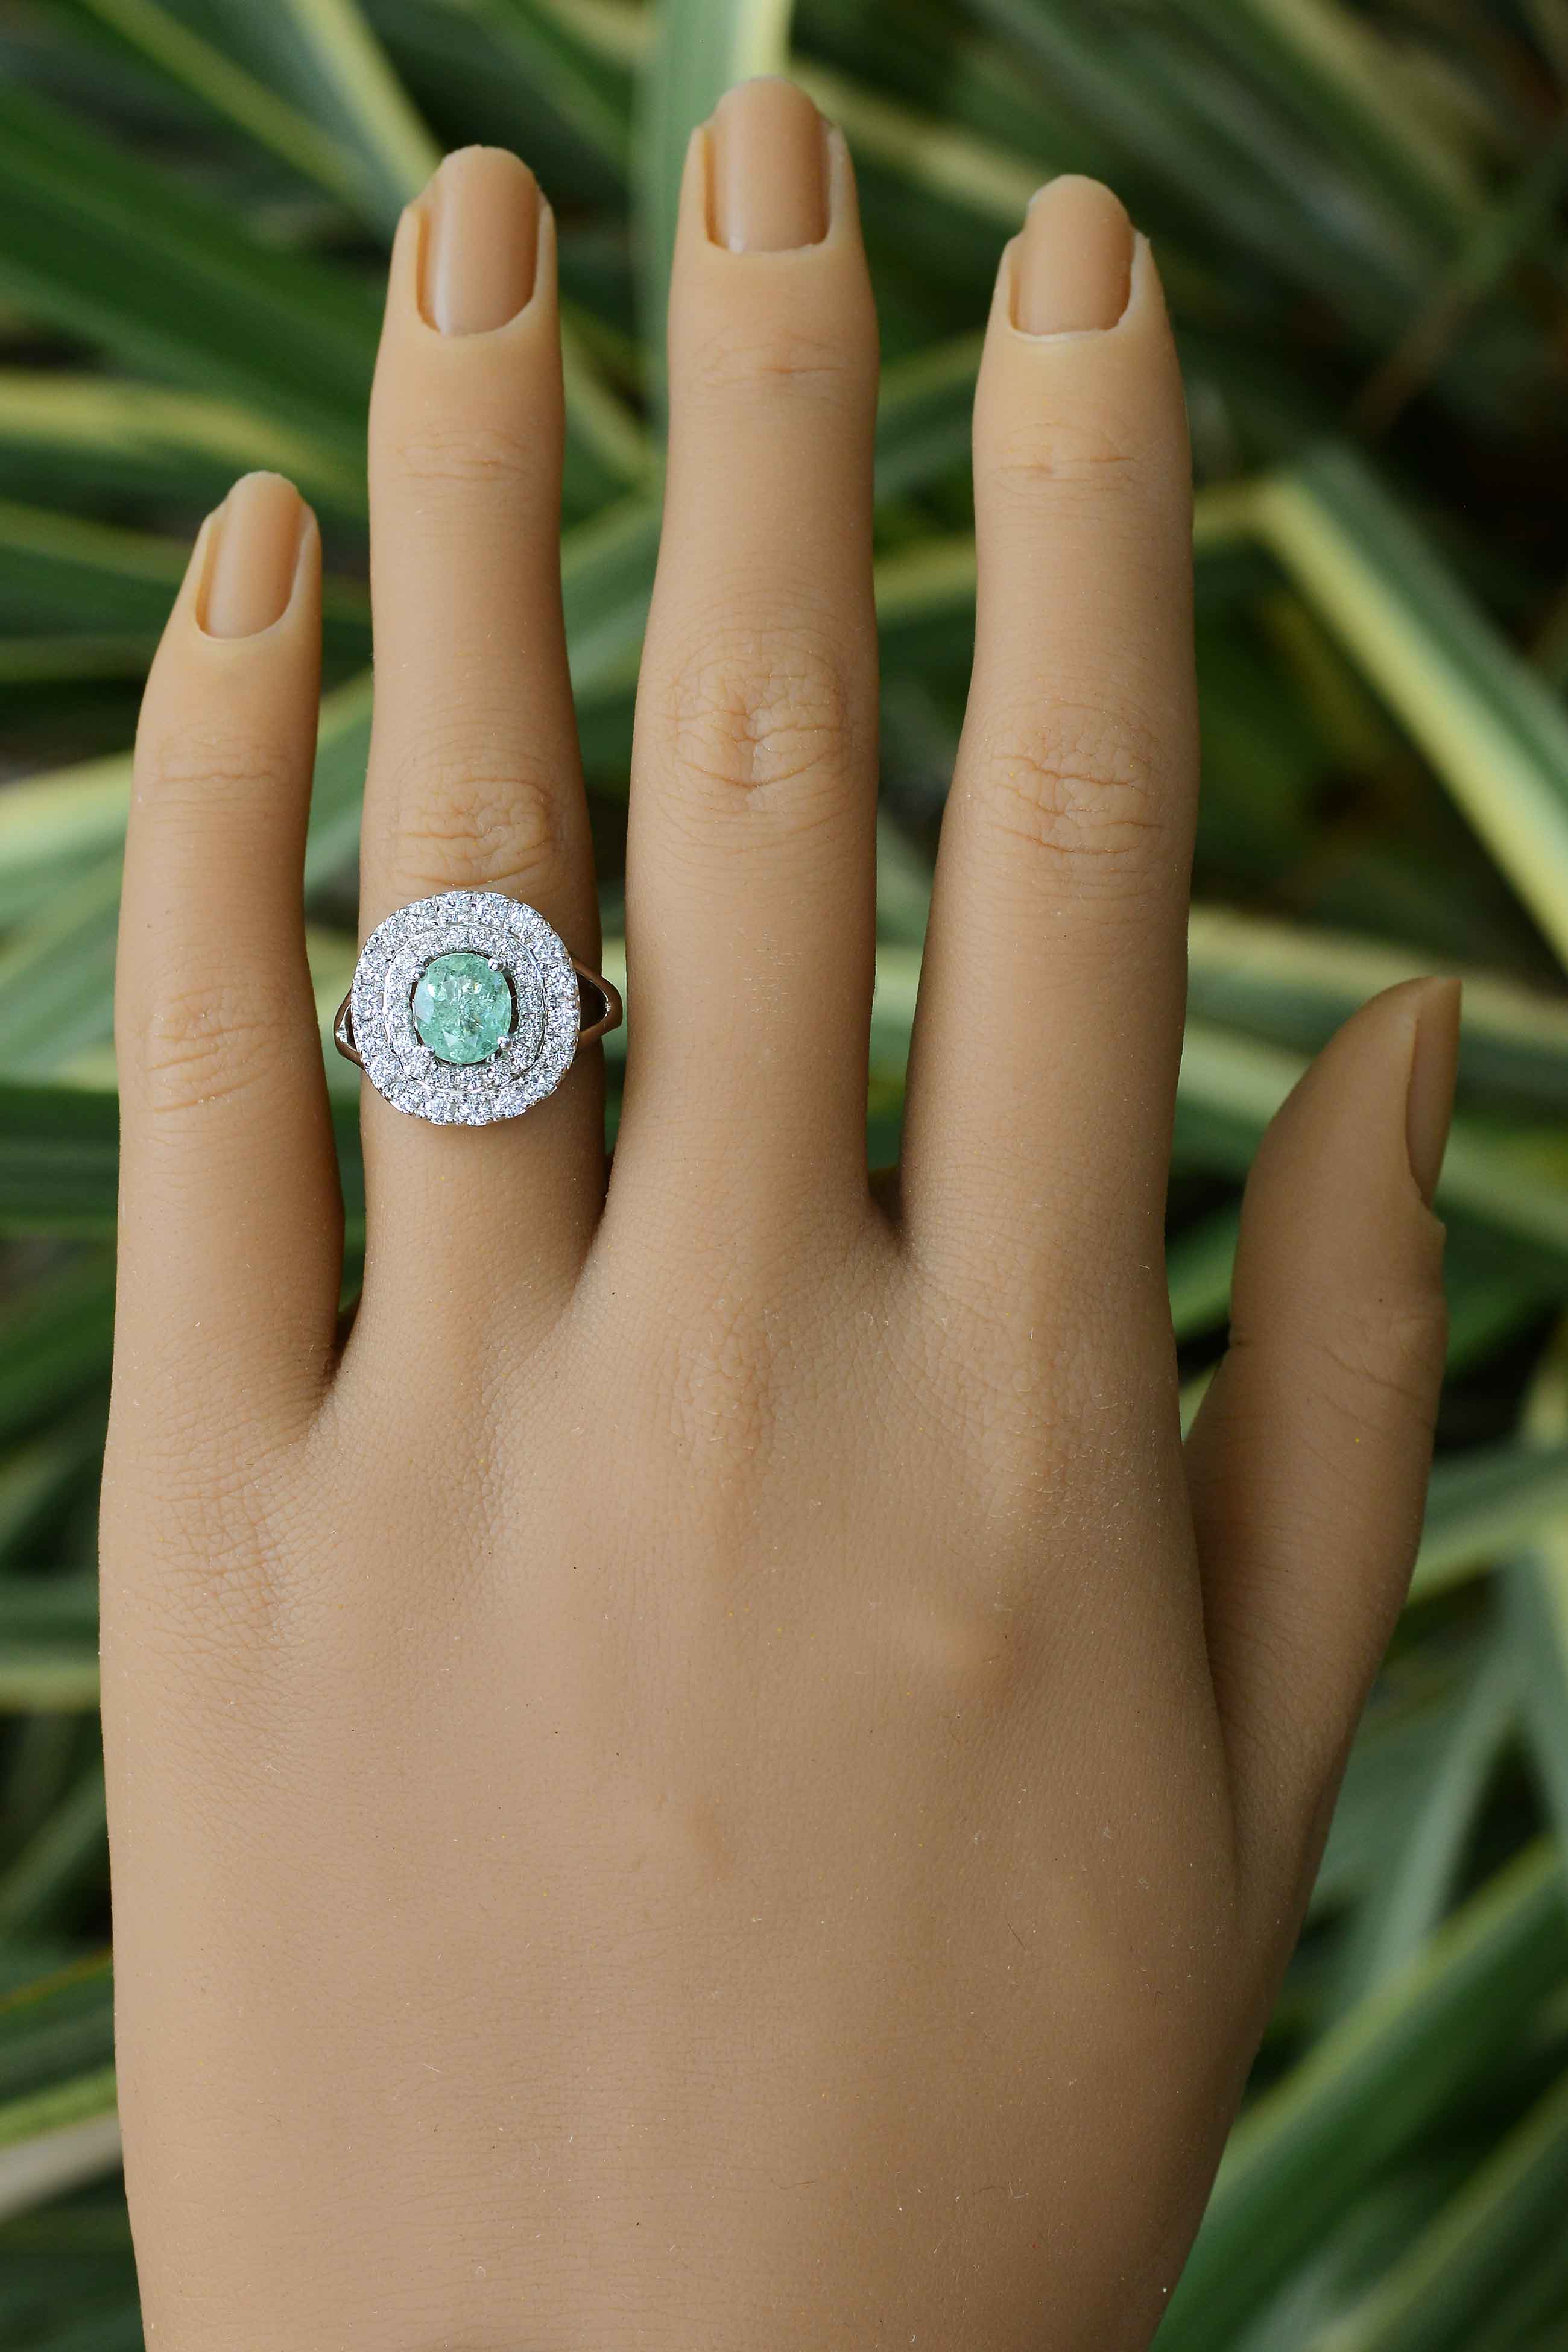 The central gem is certified by the Gemological Institute Laboratories as natural Paraiba and of a captivating, bluish, sea-foam green.